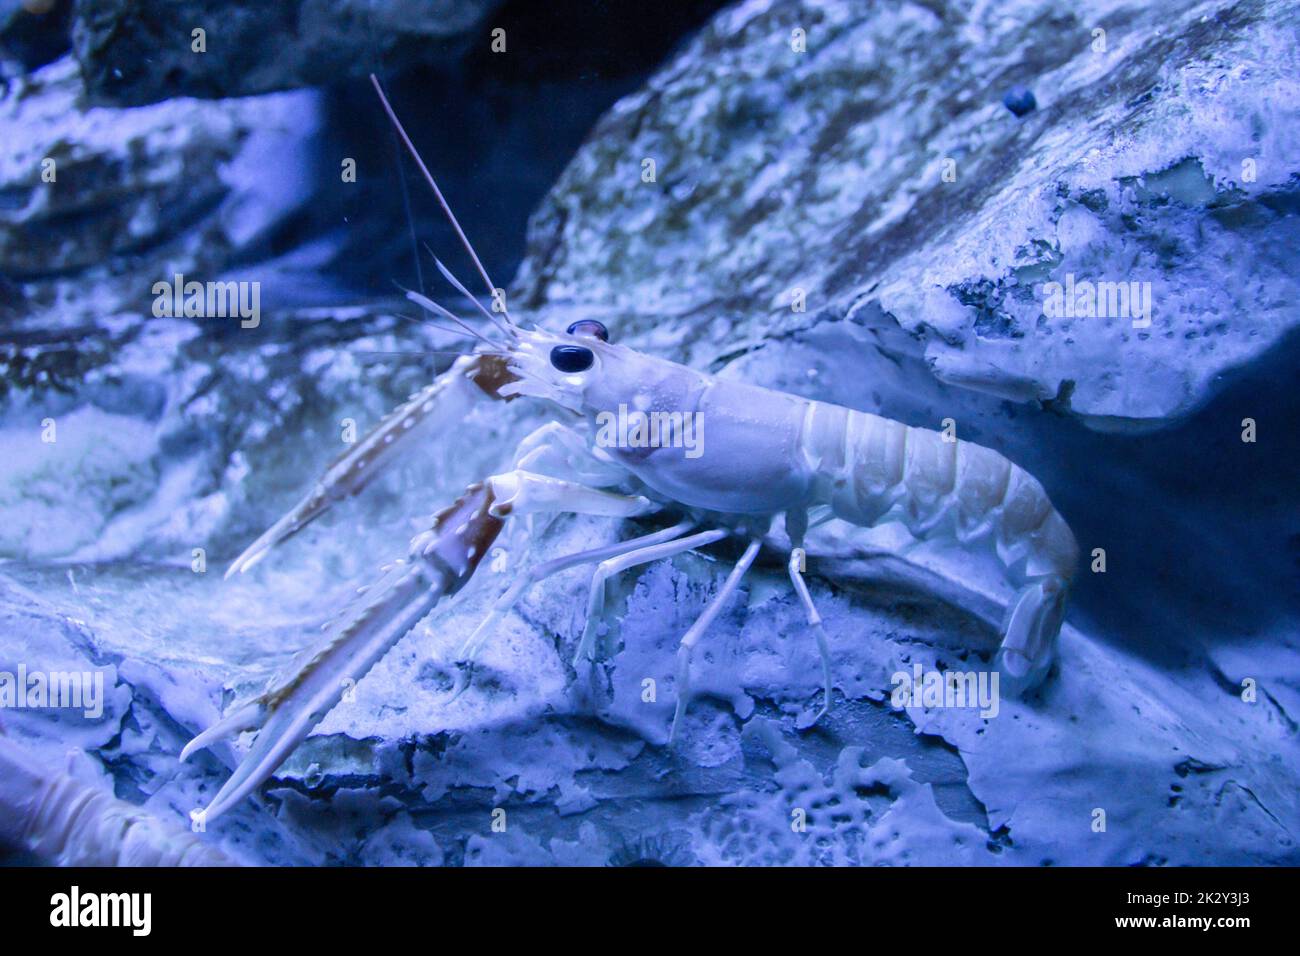 Langoustine close-up view in ocean Stock Photo